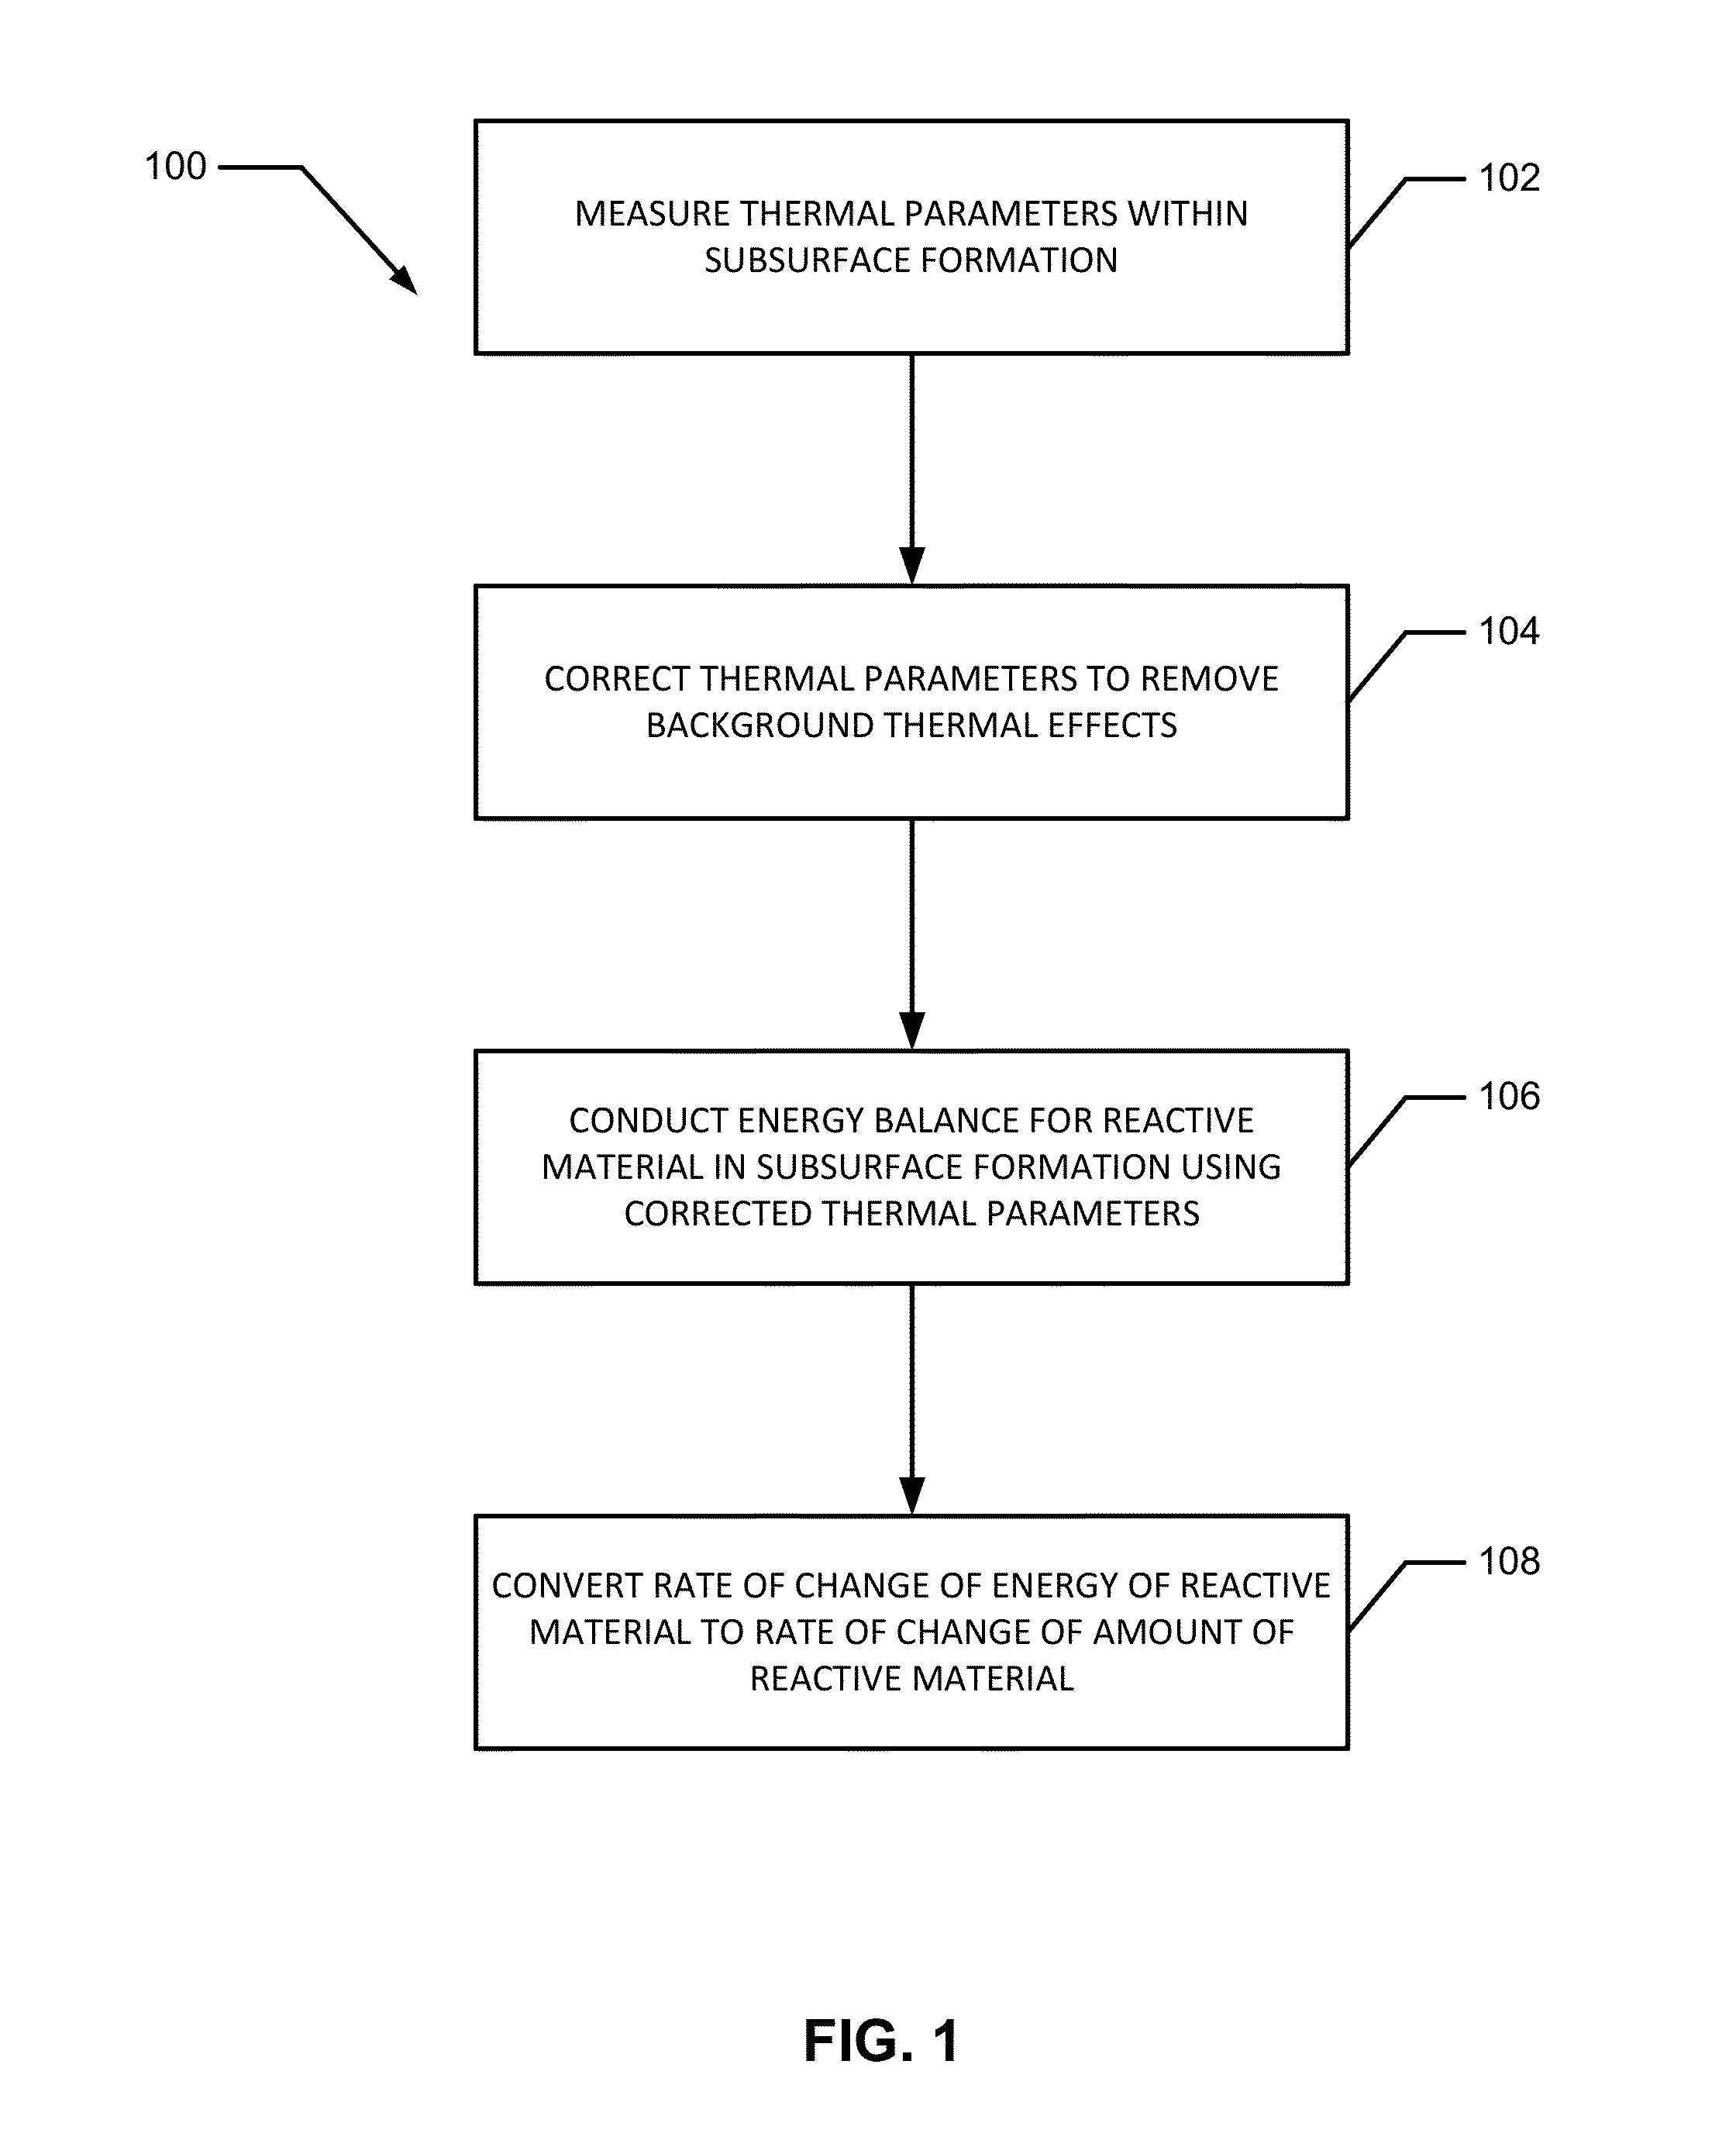 Devices and methods for measuring thermal flux and estimating rate of change of reactive material within a subsurface formation